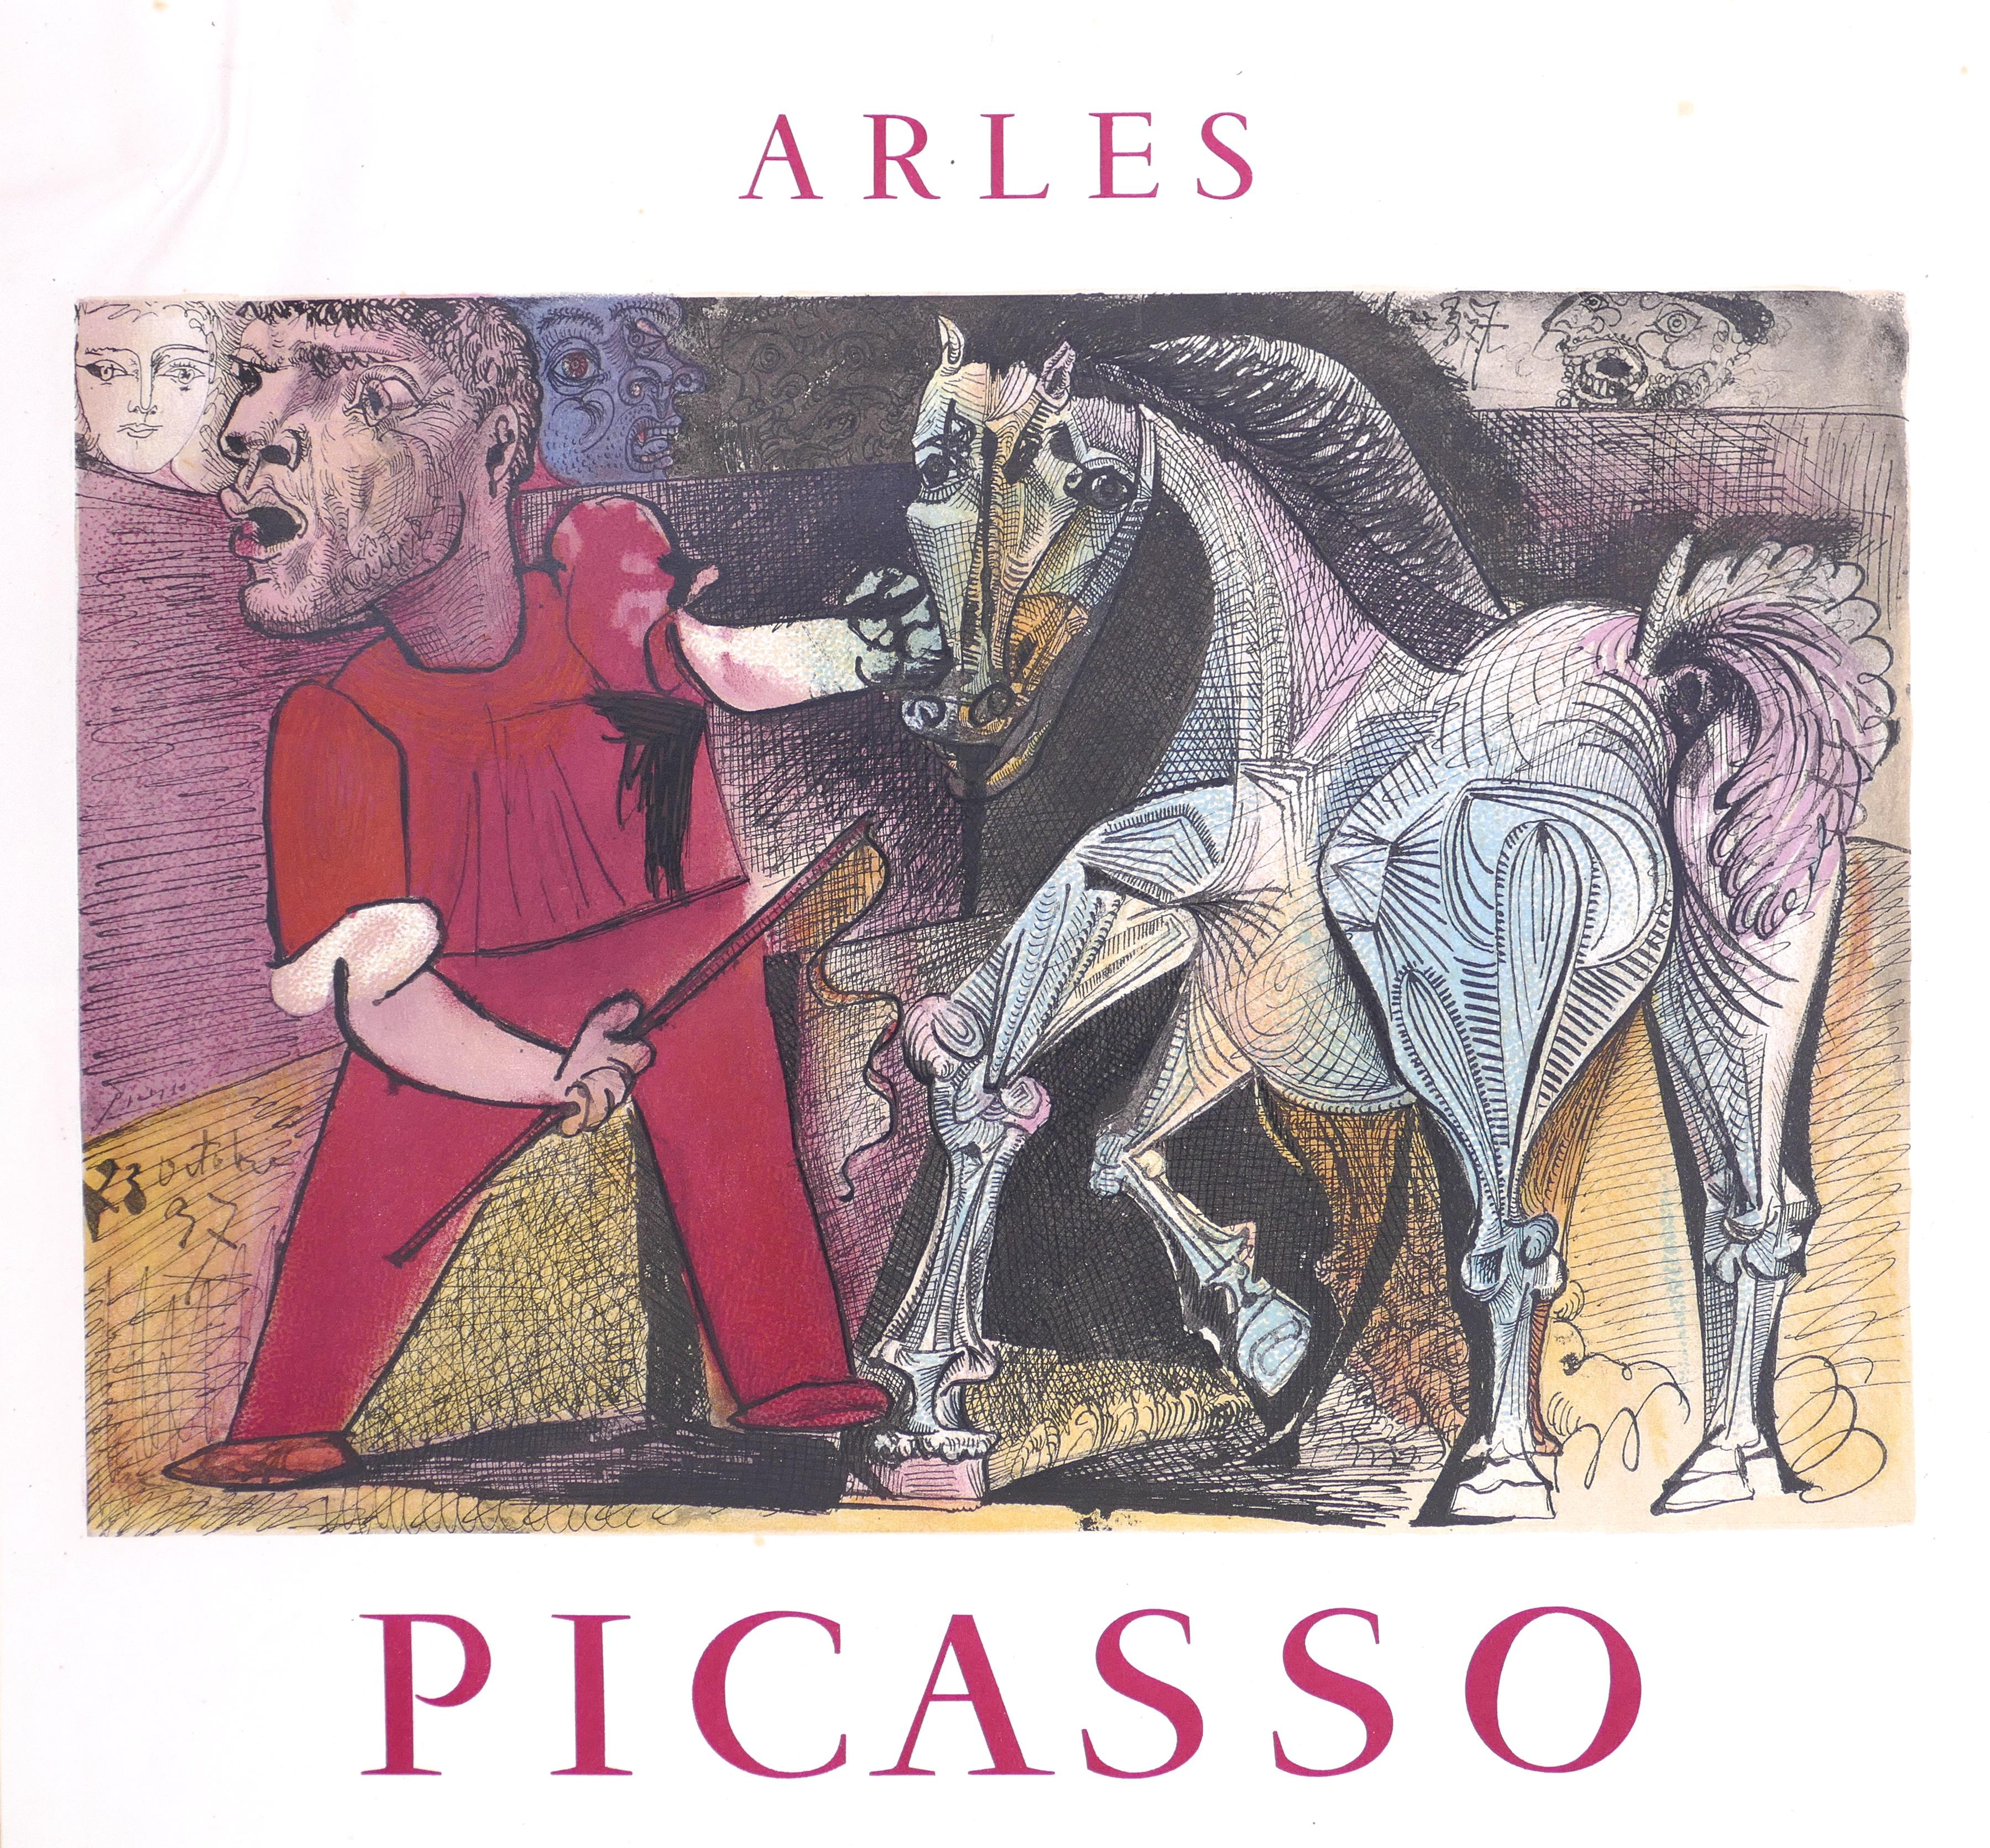 arles picasso